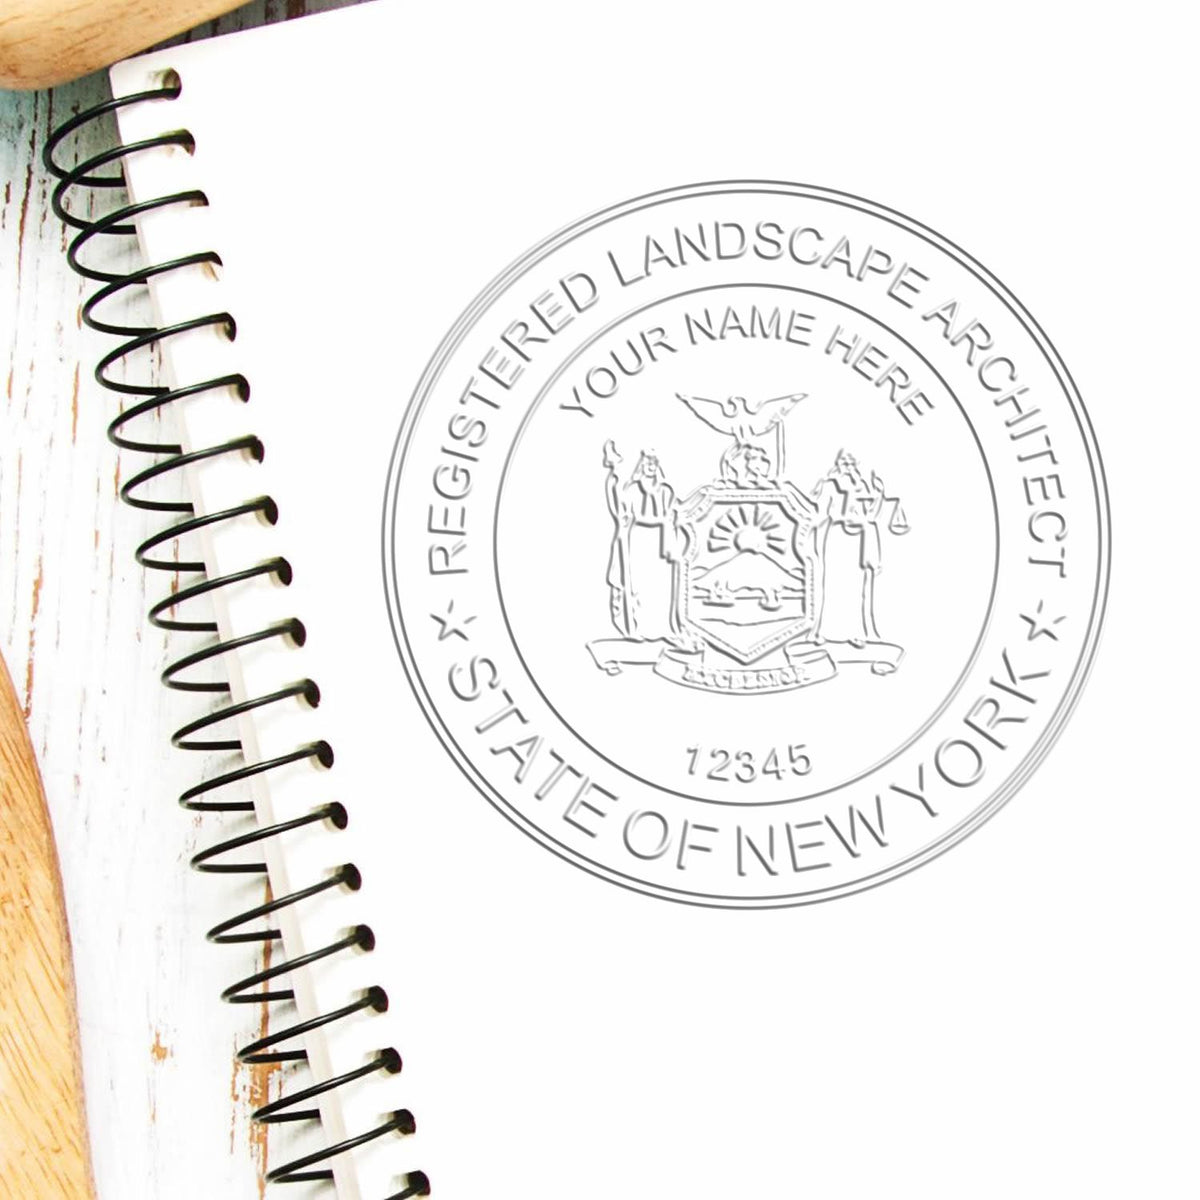 The Soft Pocket New York Landscape Architect Embosser stamp impression comes to life with a crisp, detailed photo on paper - showcasing true professional quality.